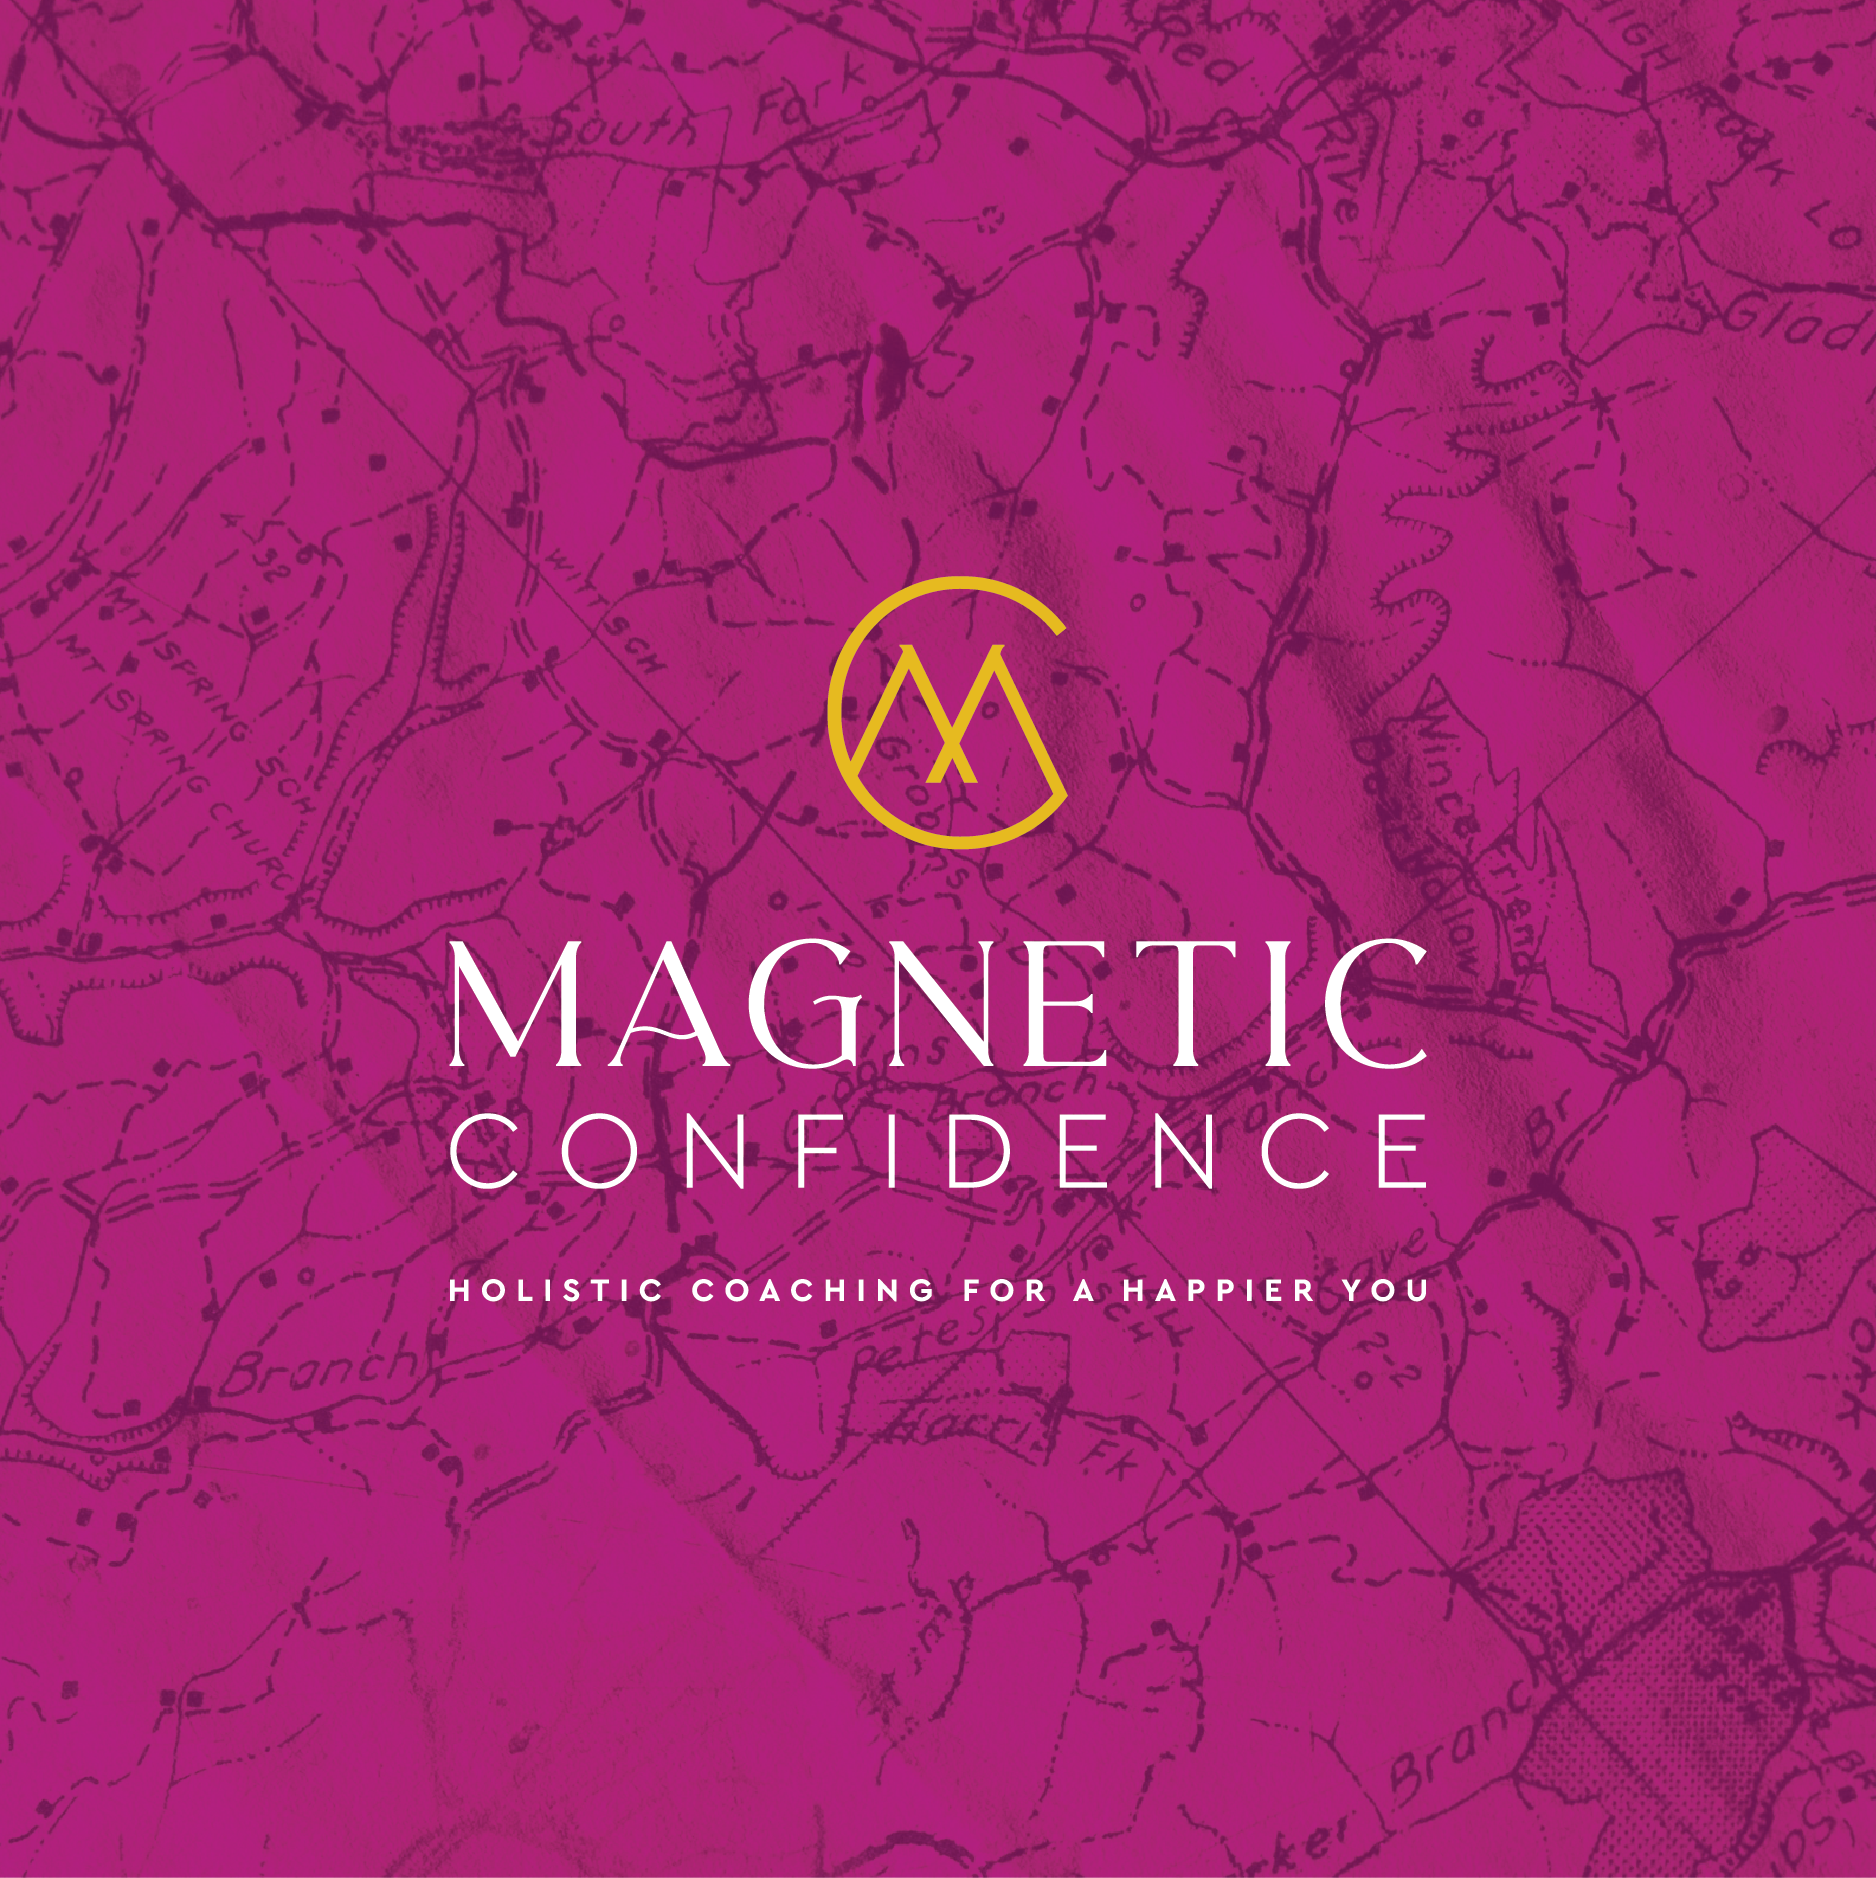 MAGNETIC CONFIDENCE